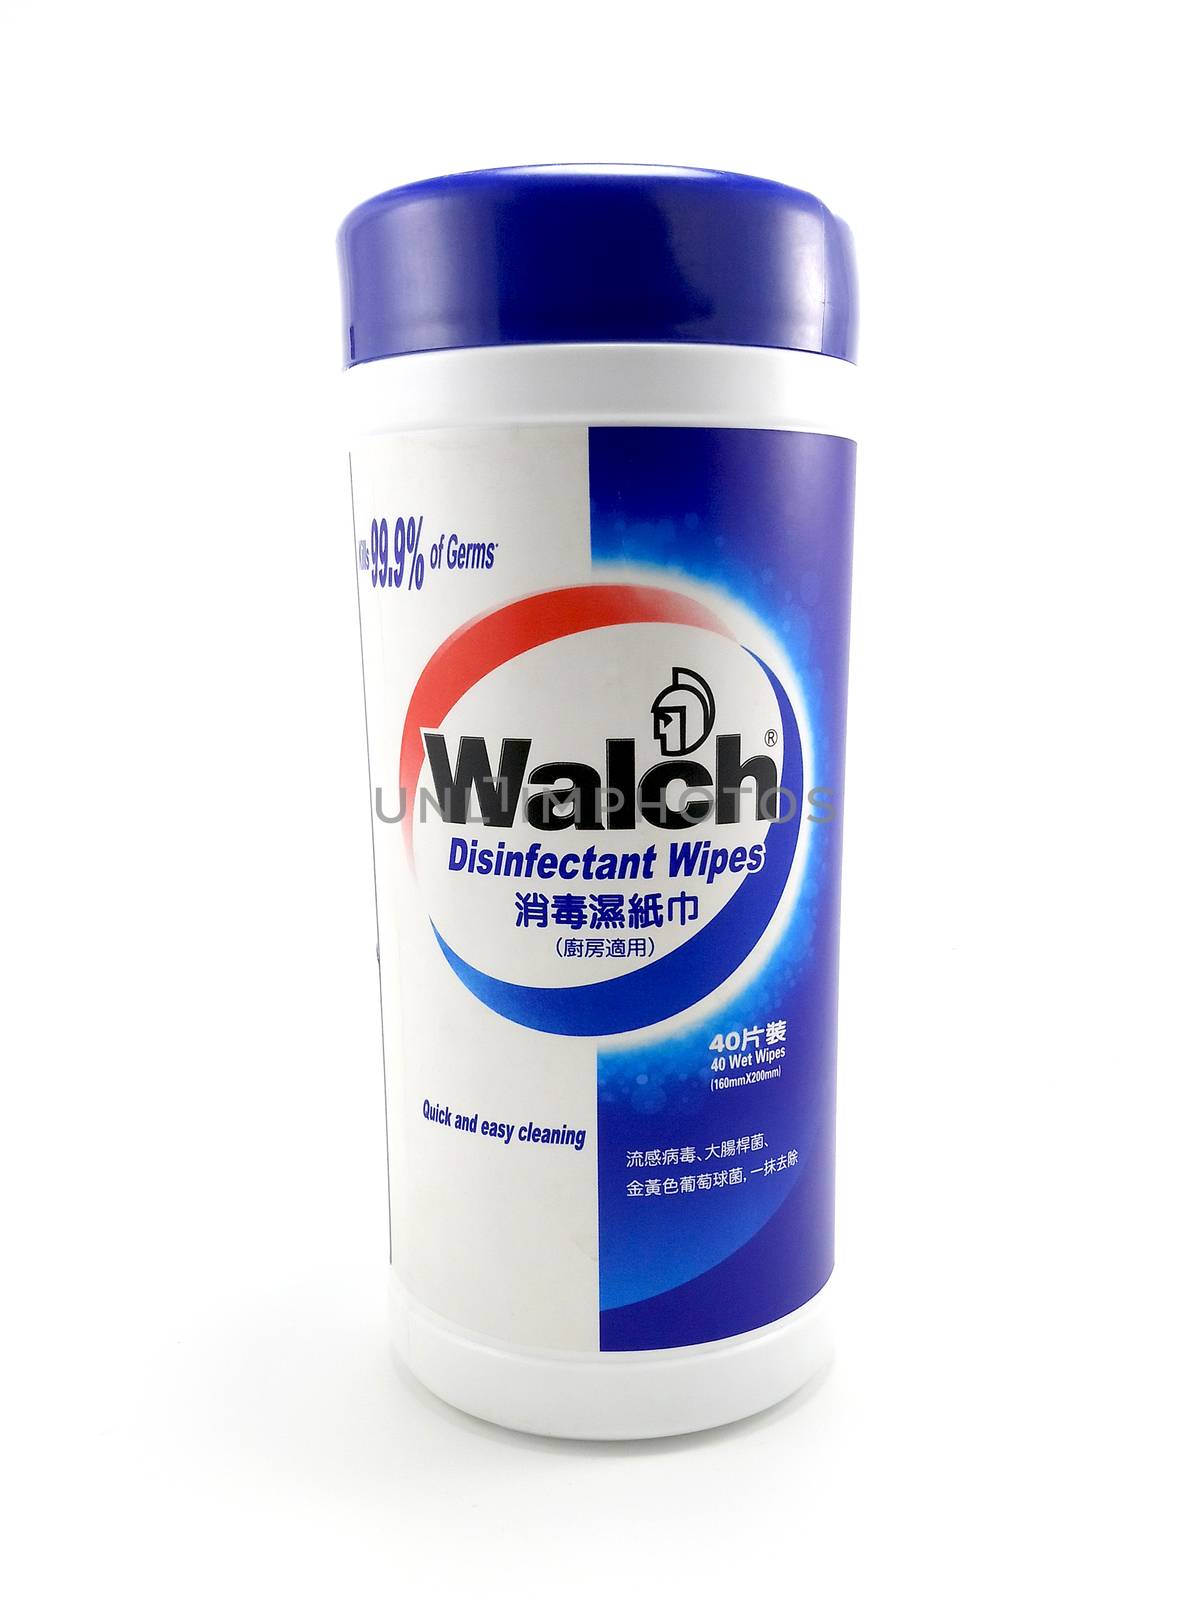 Walch disinfectant wipes wet tissue in Manila, Philippines by imwaltersy